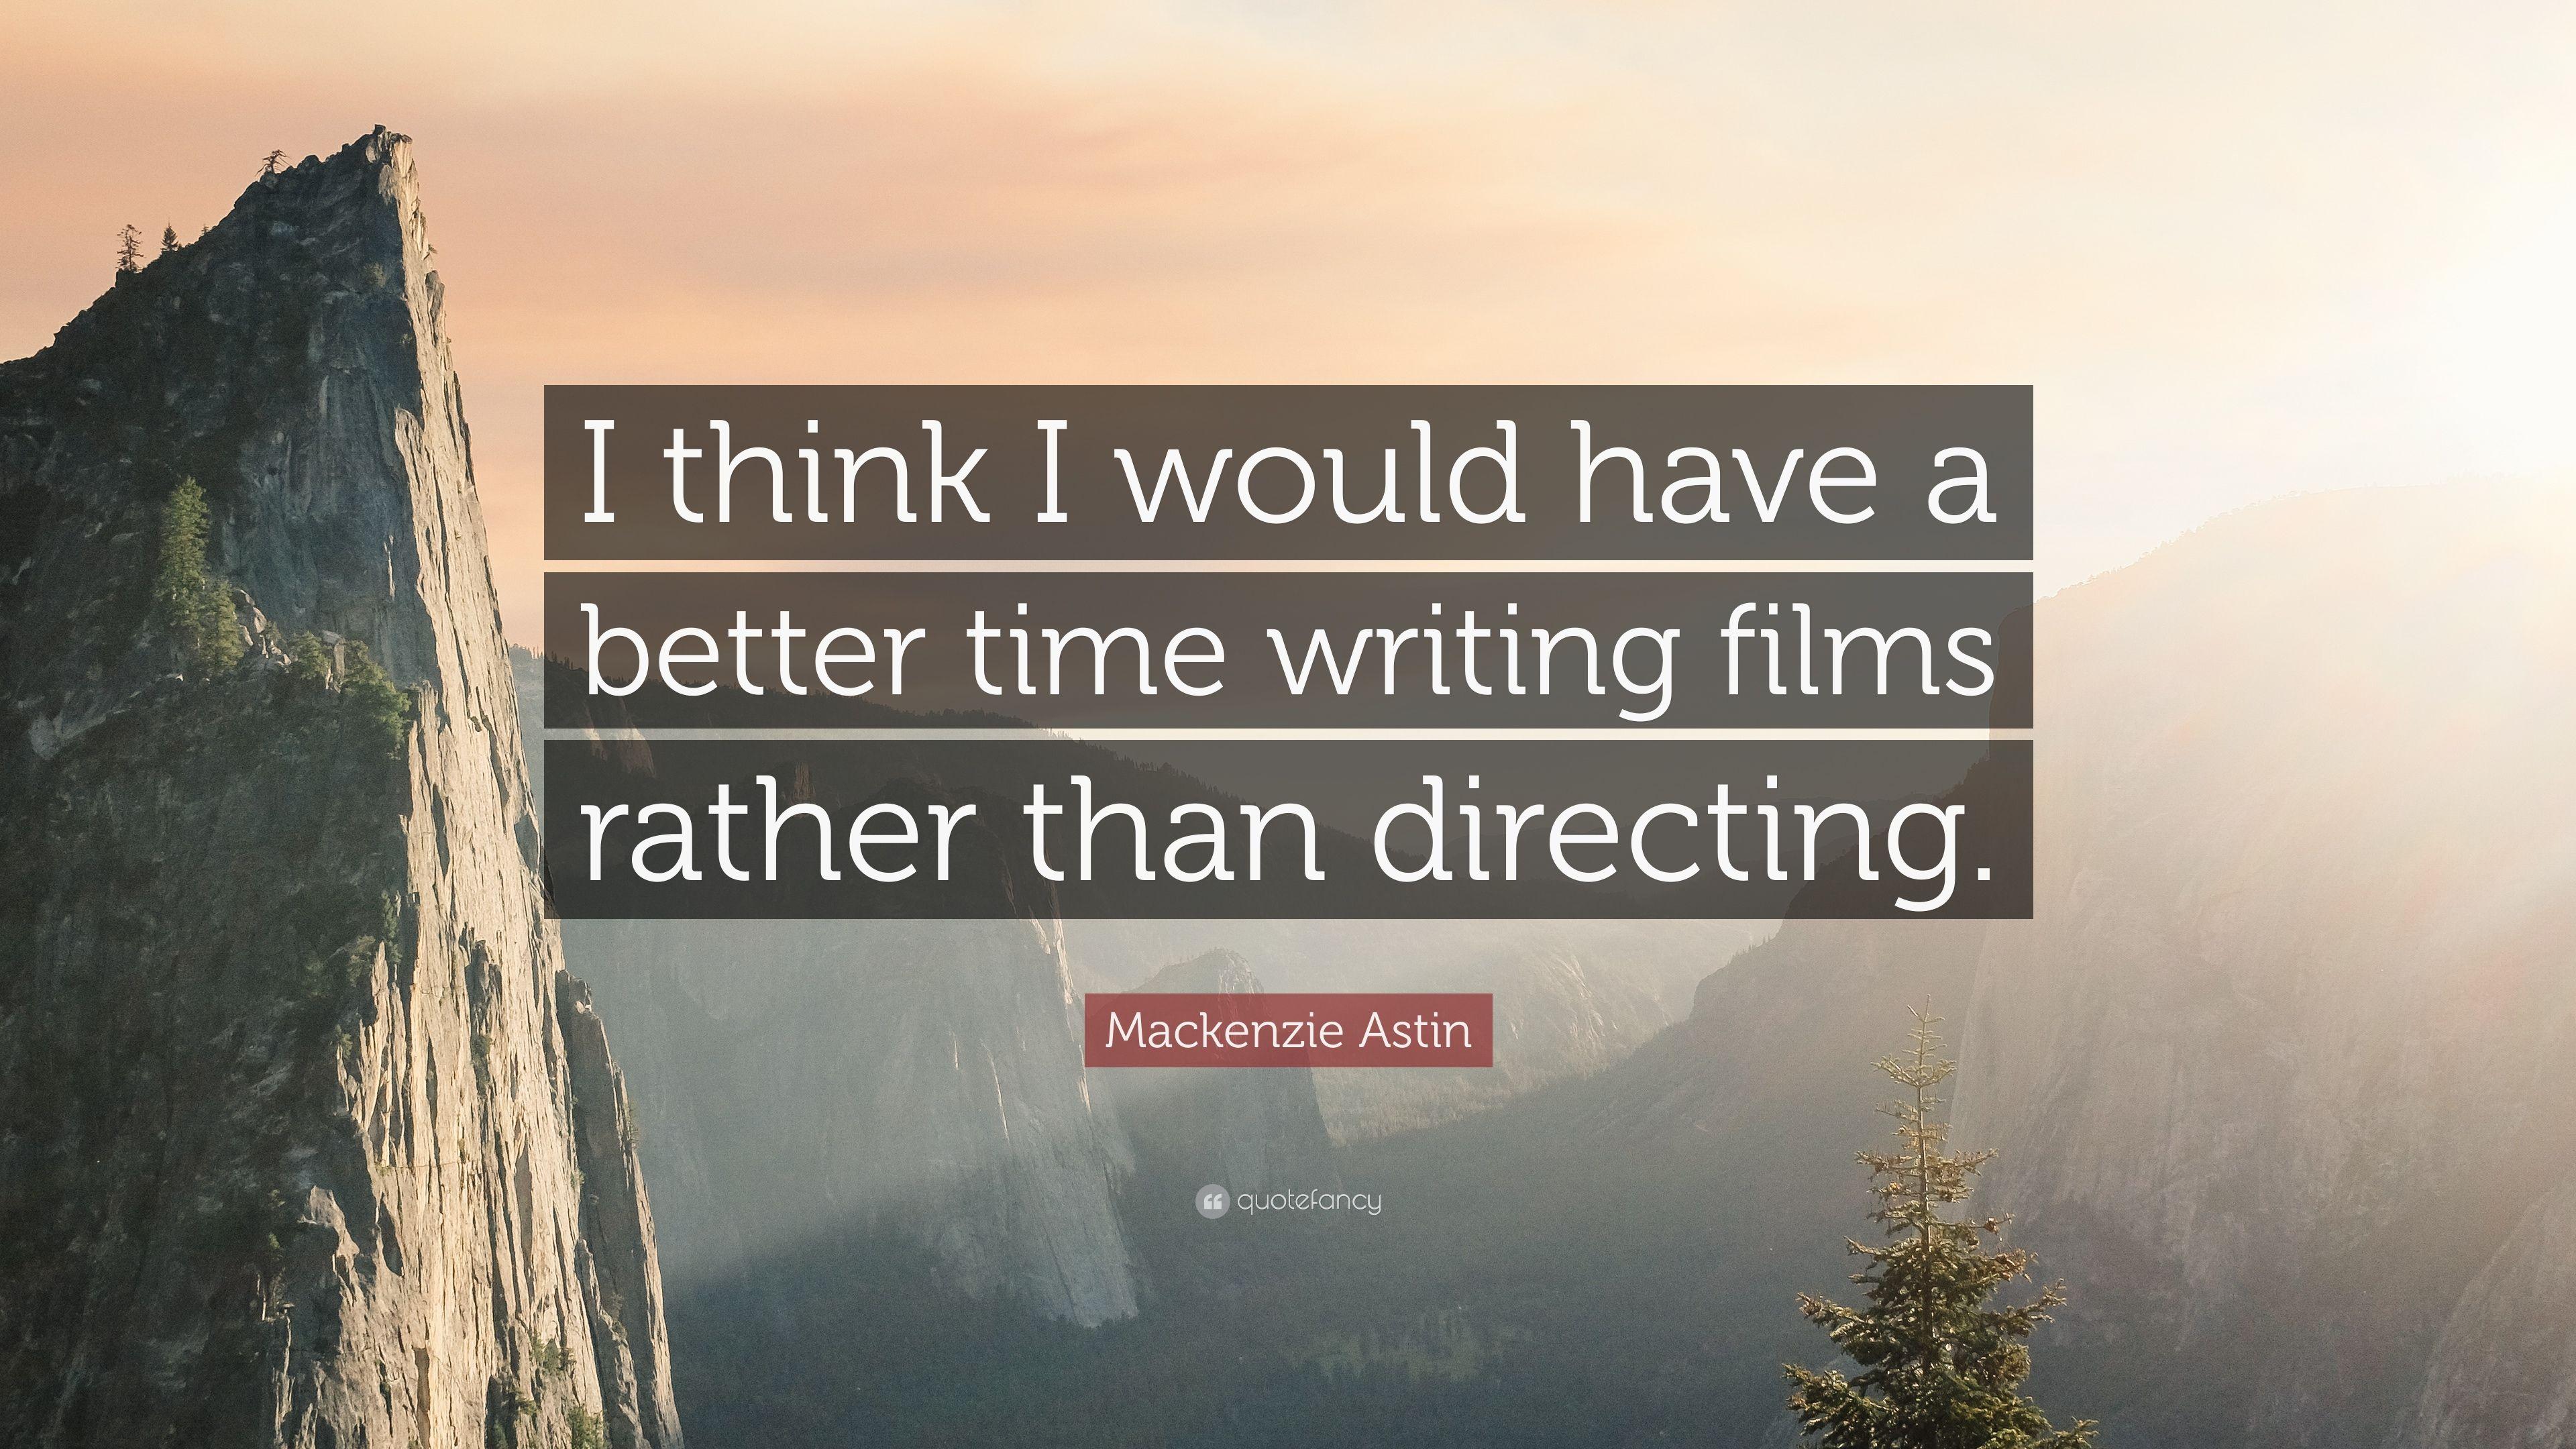 Mackenzie Astin Quote: “I think I would have a better time writing